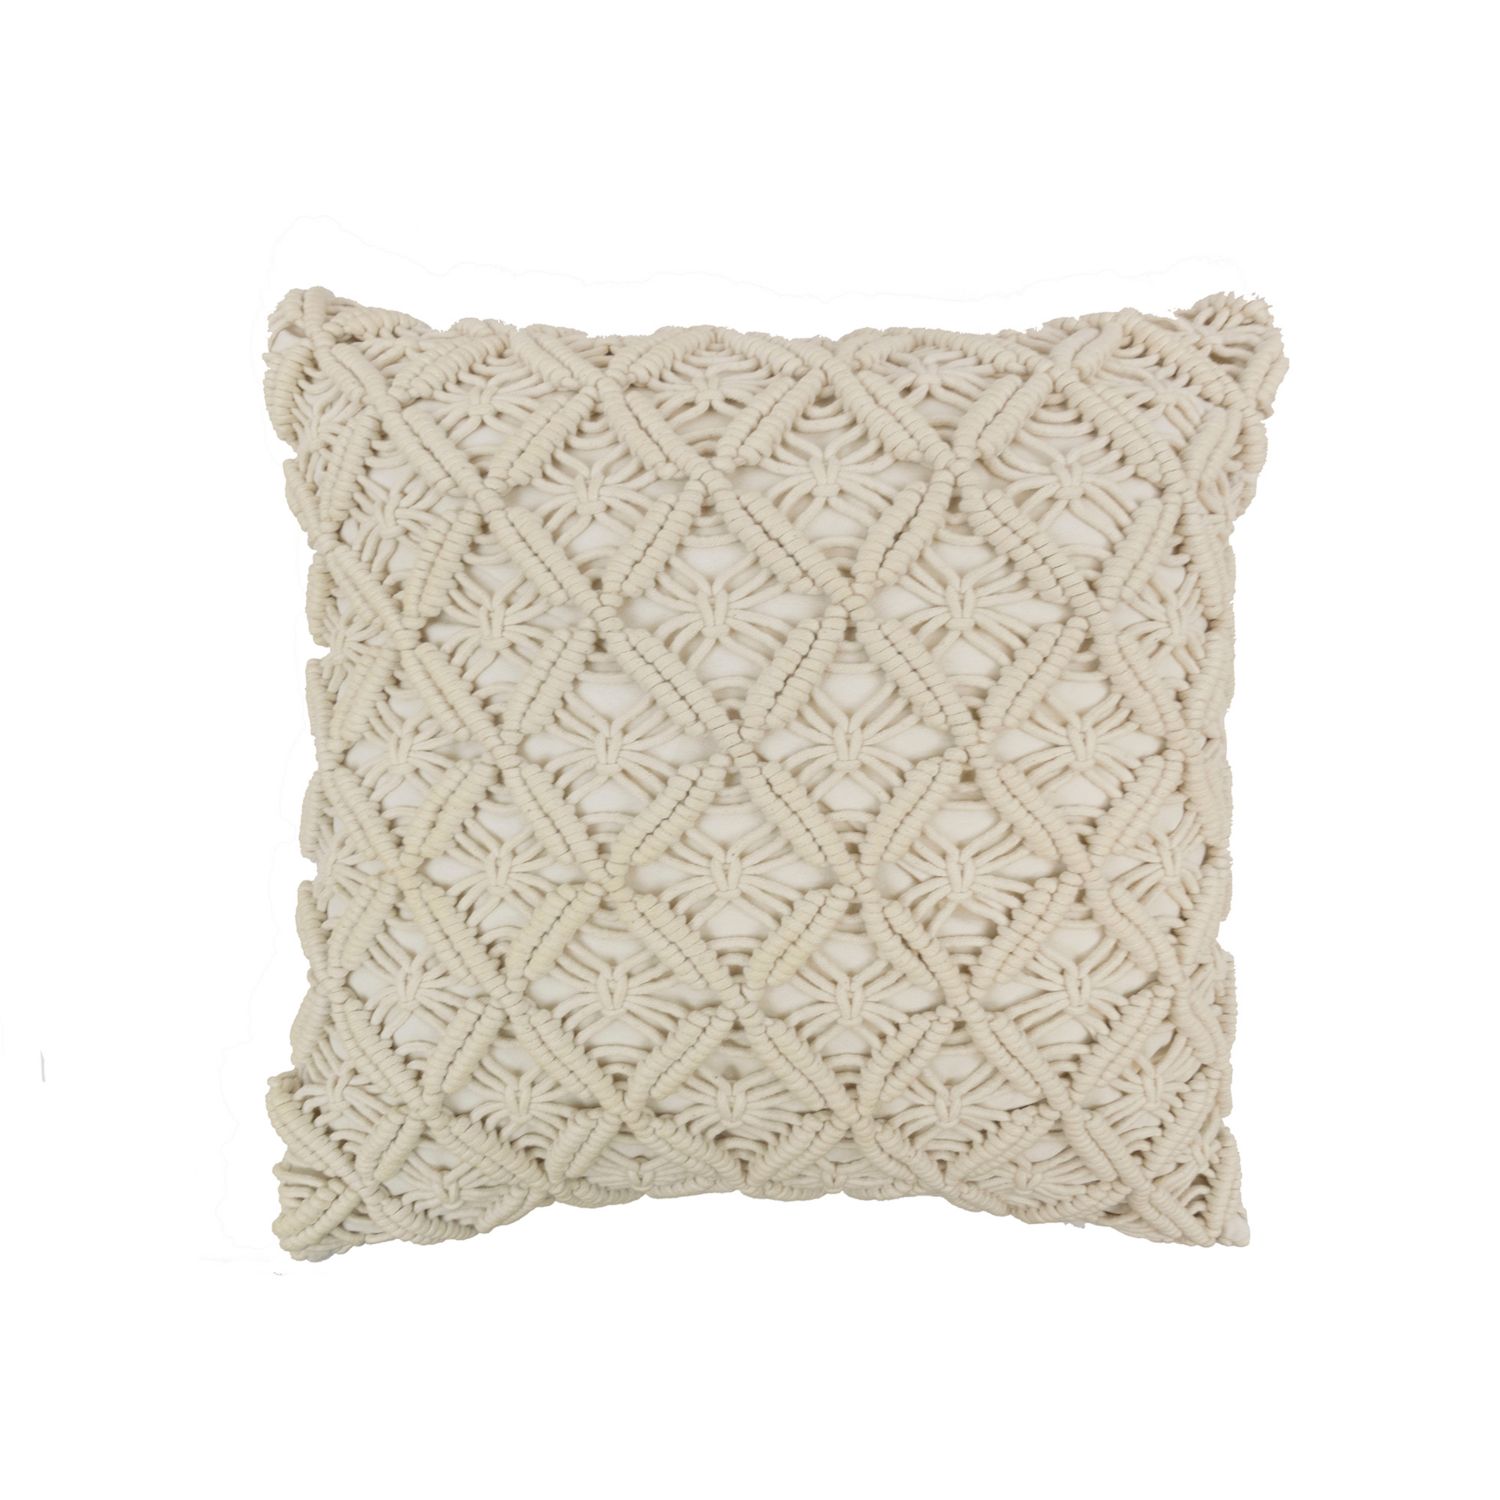 Image for Donna Sharp Mountain Lodge Crochet Decorative Pillow at Kohl's.